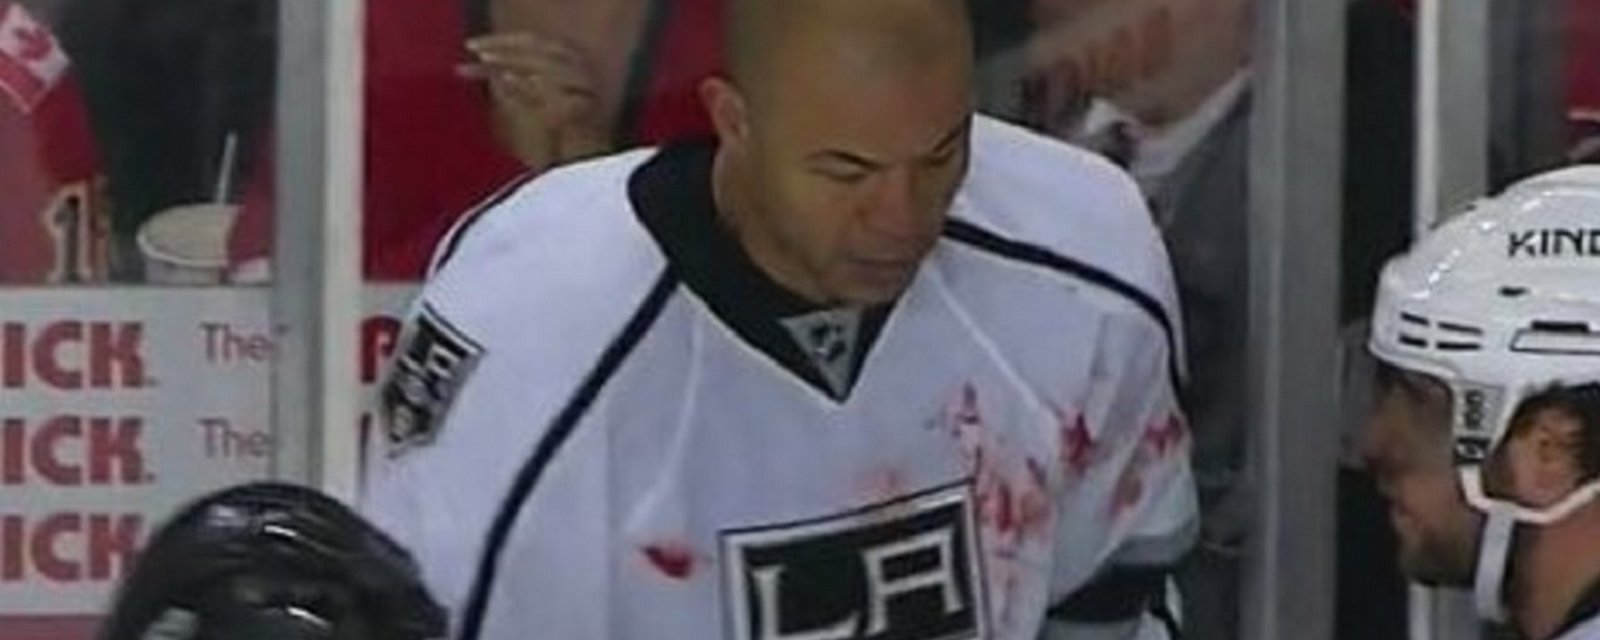 Iginla wearing Engelland's blood on his jersey after great fight between two vets.